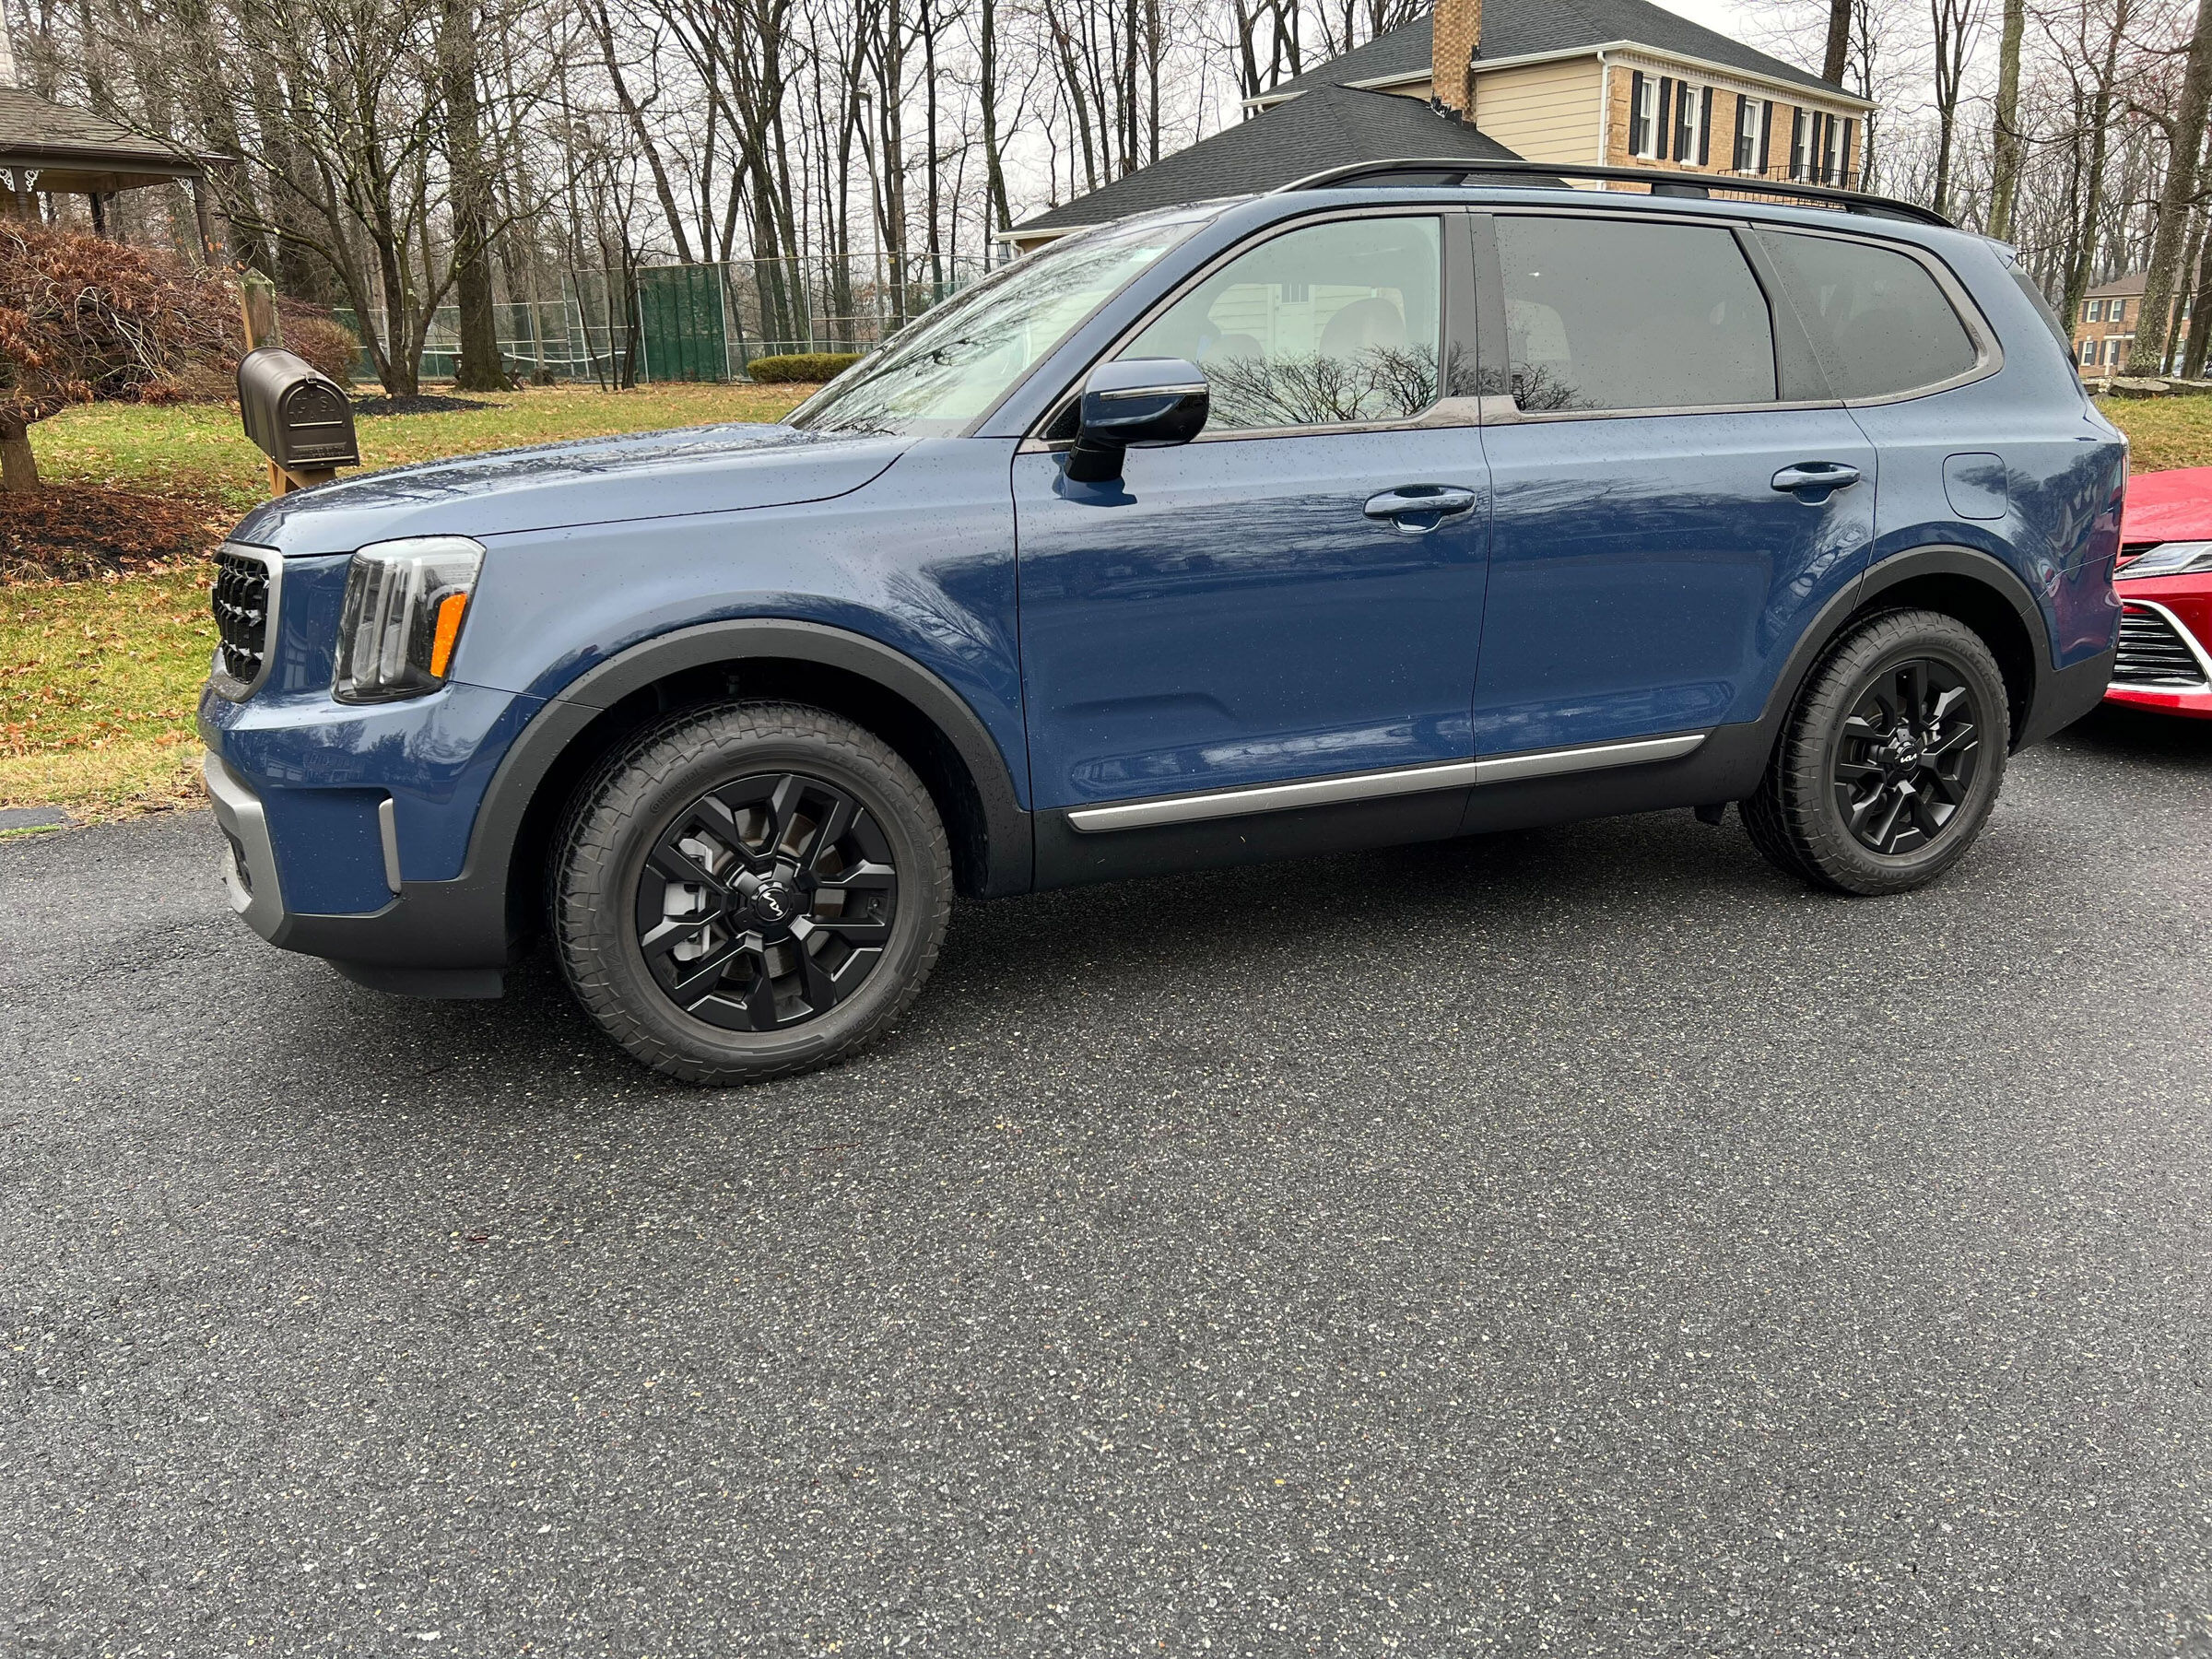 Car Review Kia Telluride brings more style and even some offroad